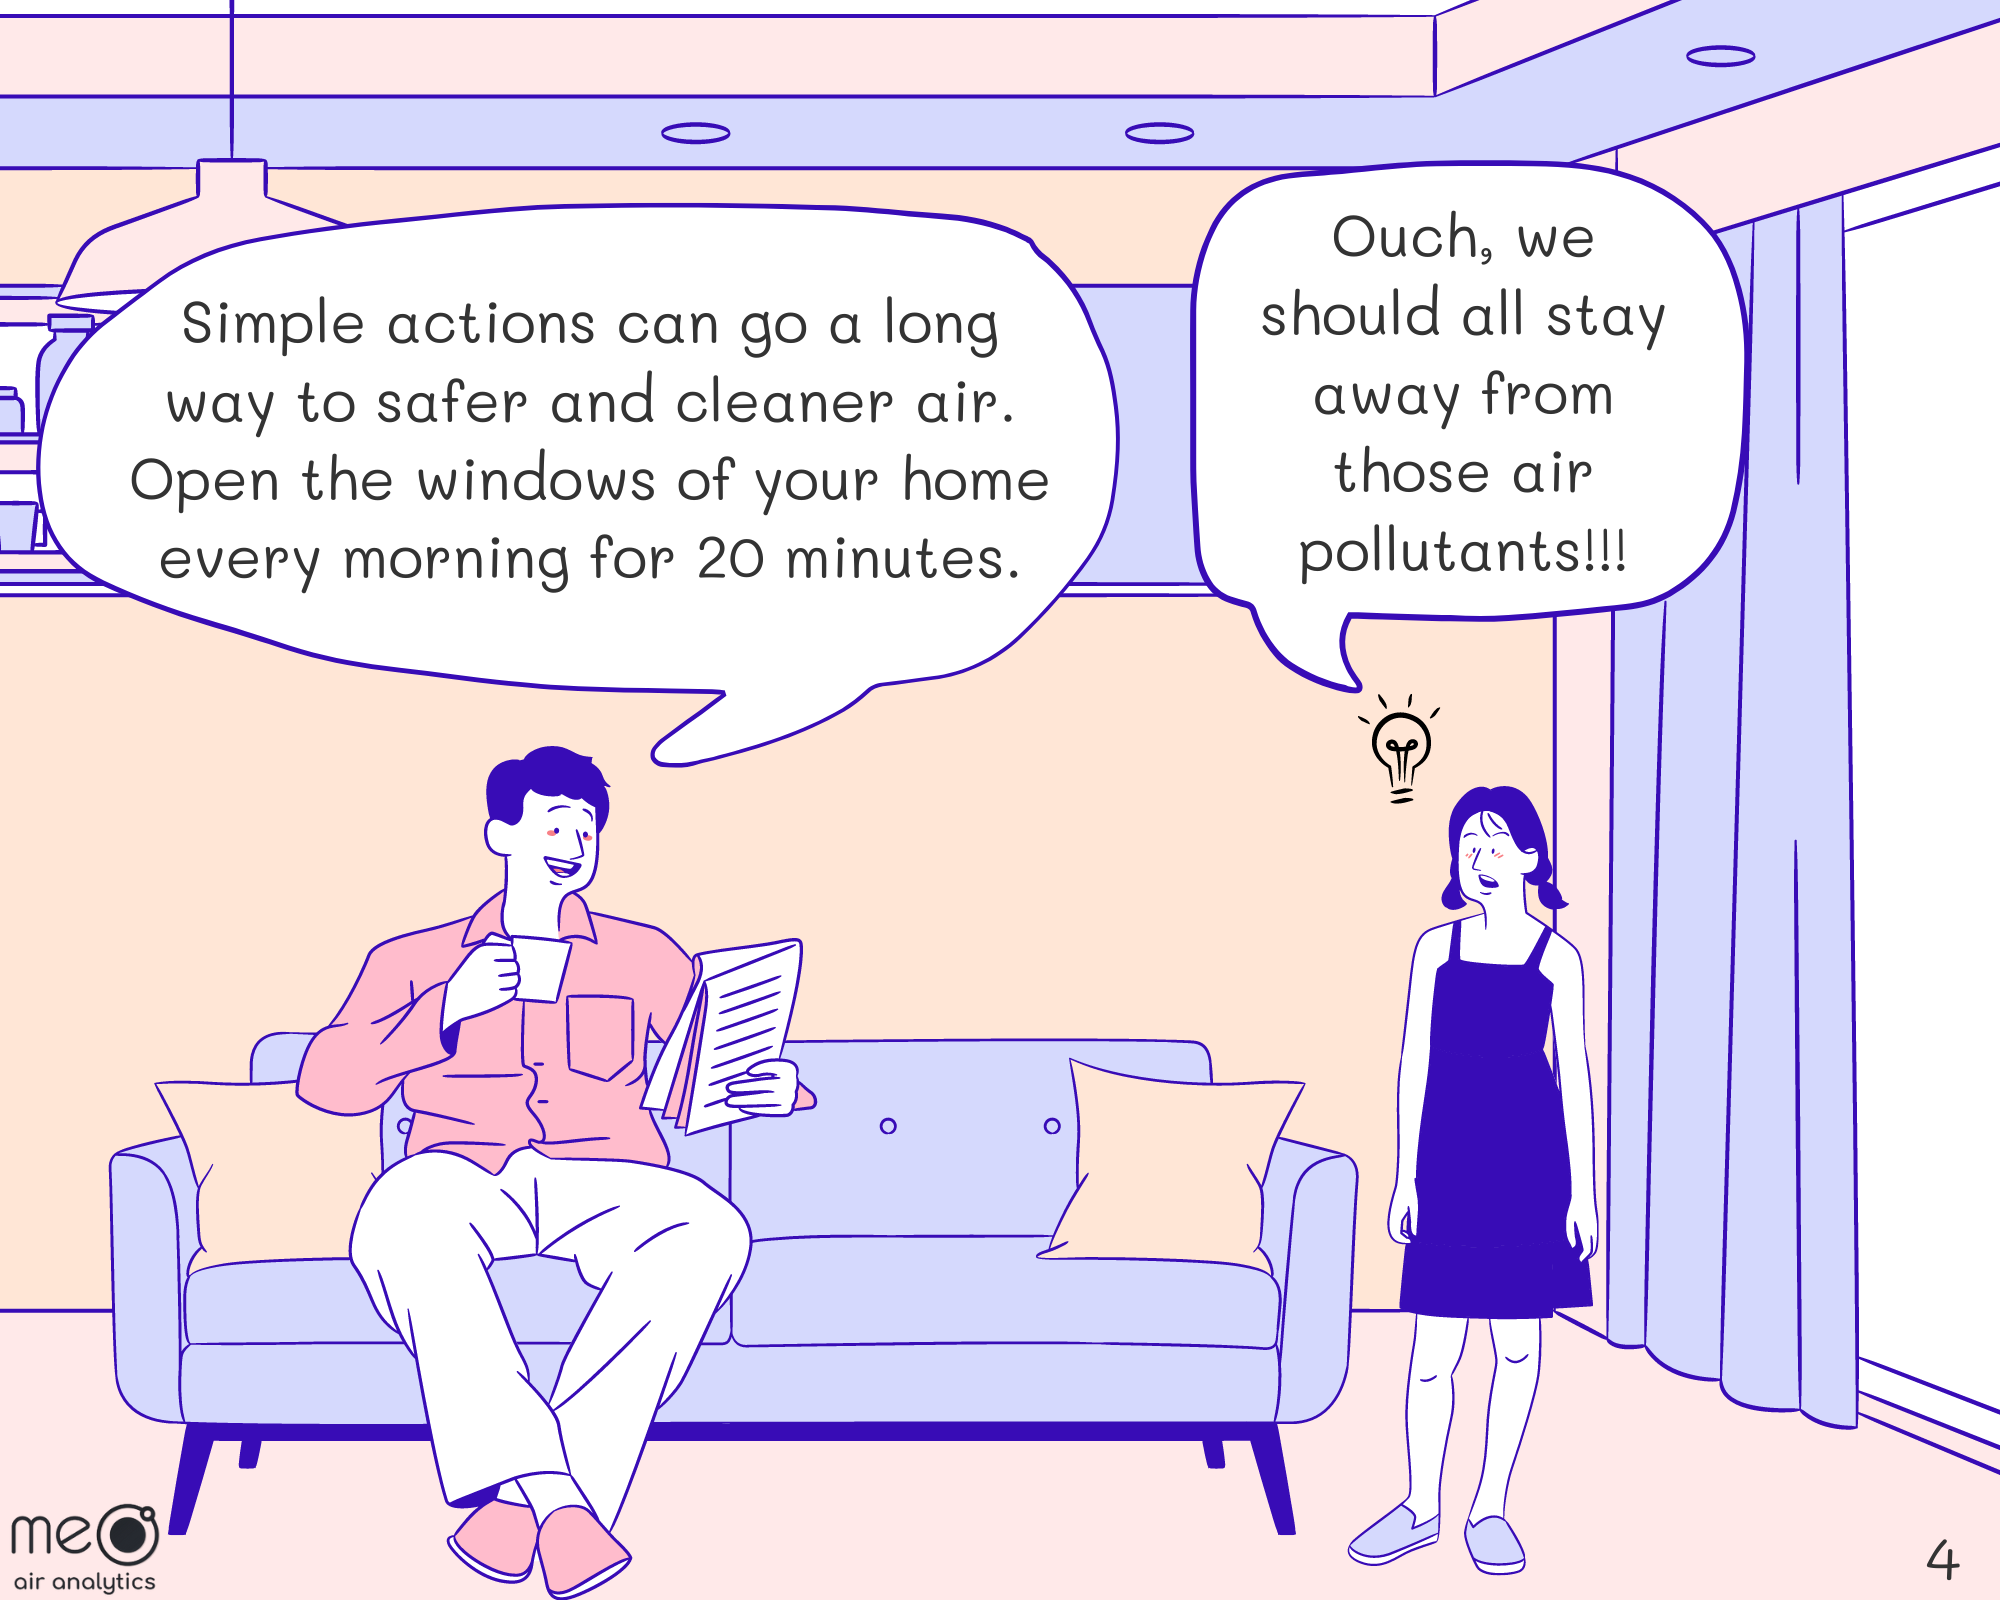 Kid: Ouch, we should all stay away from those air pollutants!!!
Dad: Simple actions can go a long way to safer and cleaner air. Open the windows of your home every morning for 20 minutes.